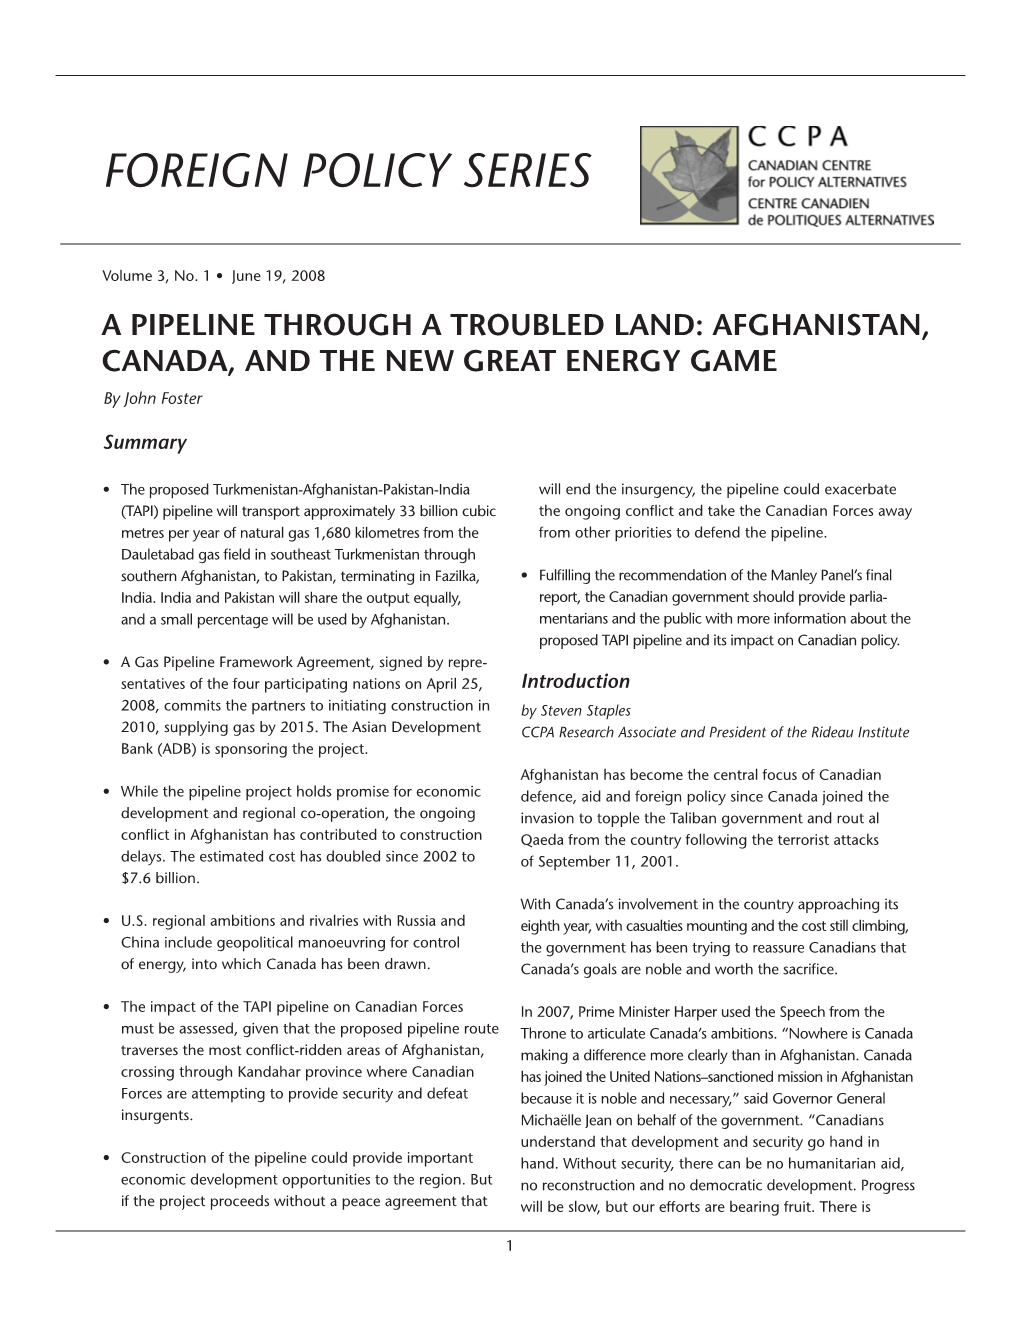 A PIPELINE THROUGH a TROUBLED LAND: AFGHANISTAN, CANADA, and the NEW GREAT ENERGY GAME by John Foster